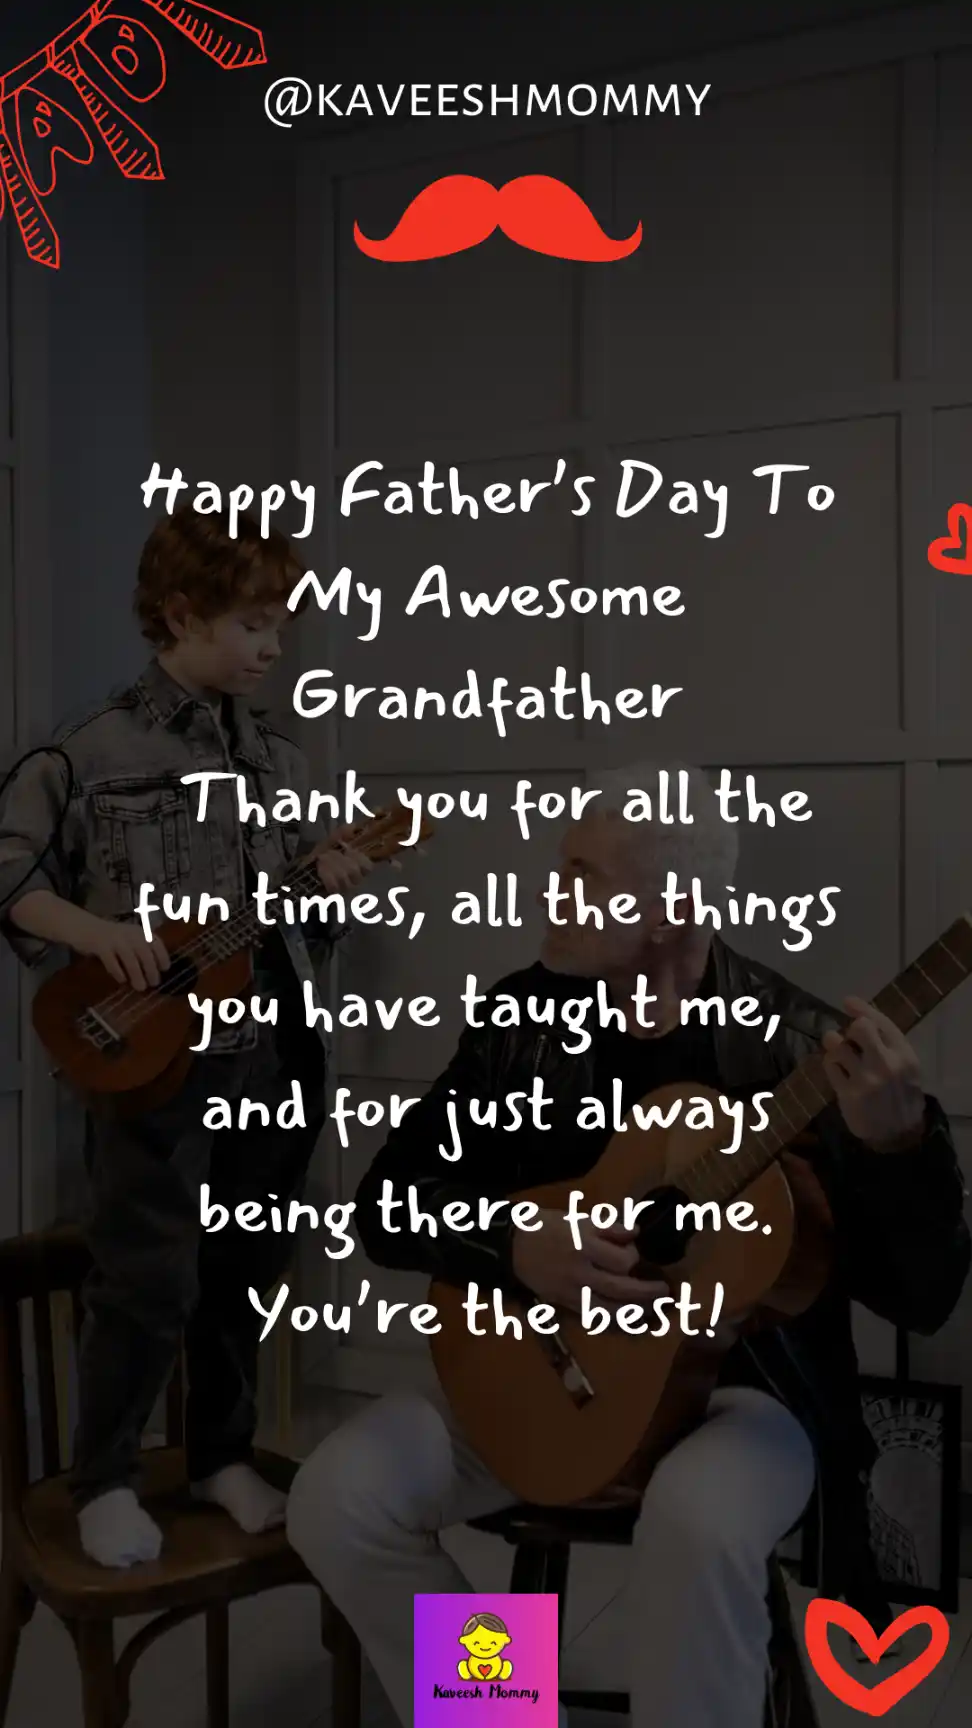 fathers day message to grandfather-KAVEESH MOMMY 